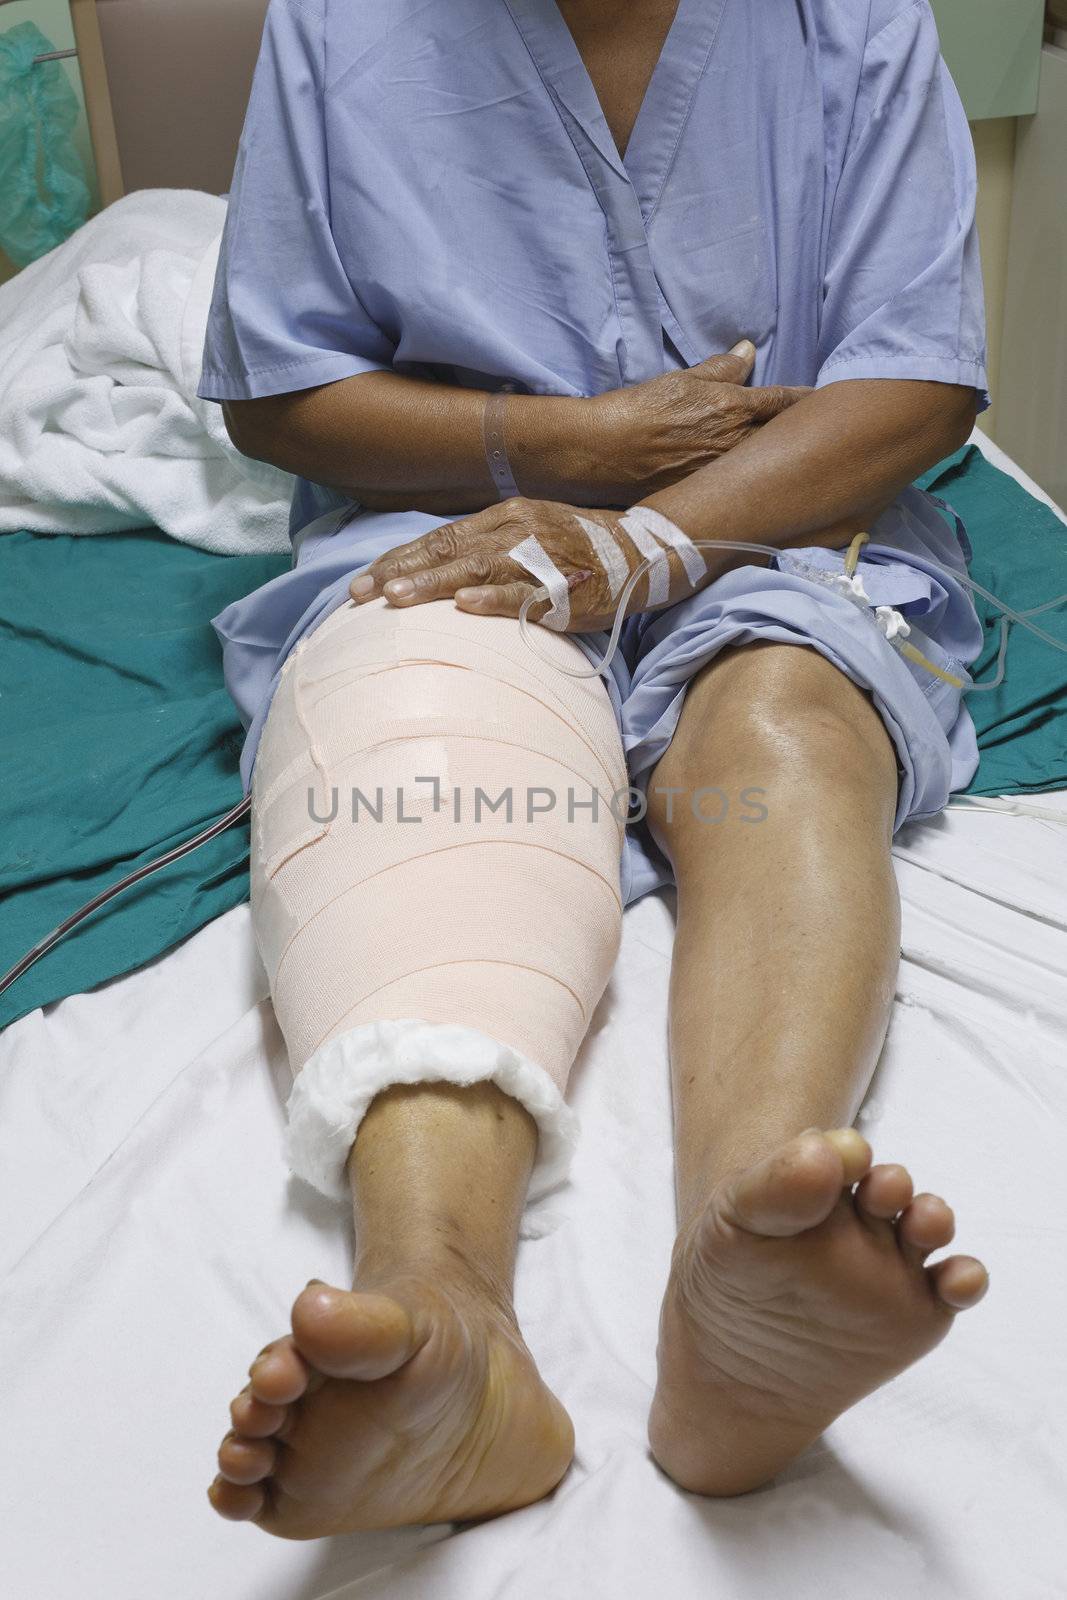 Knee replacement incision by olovedog